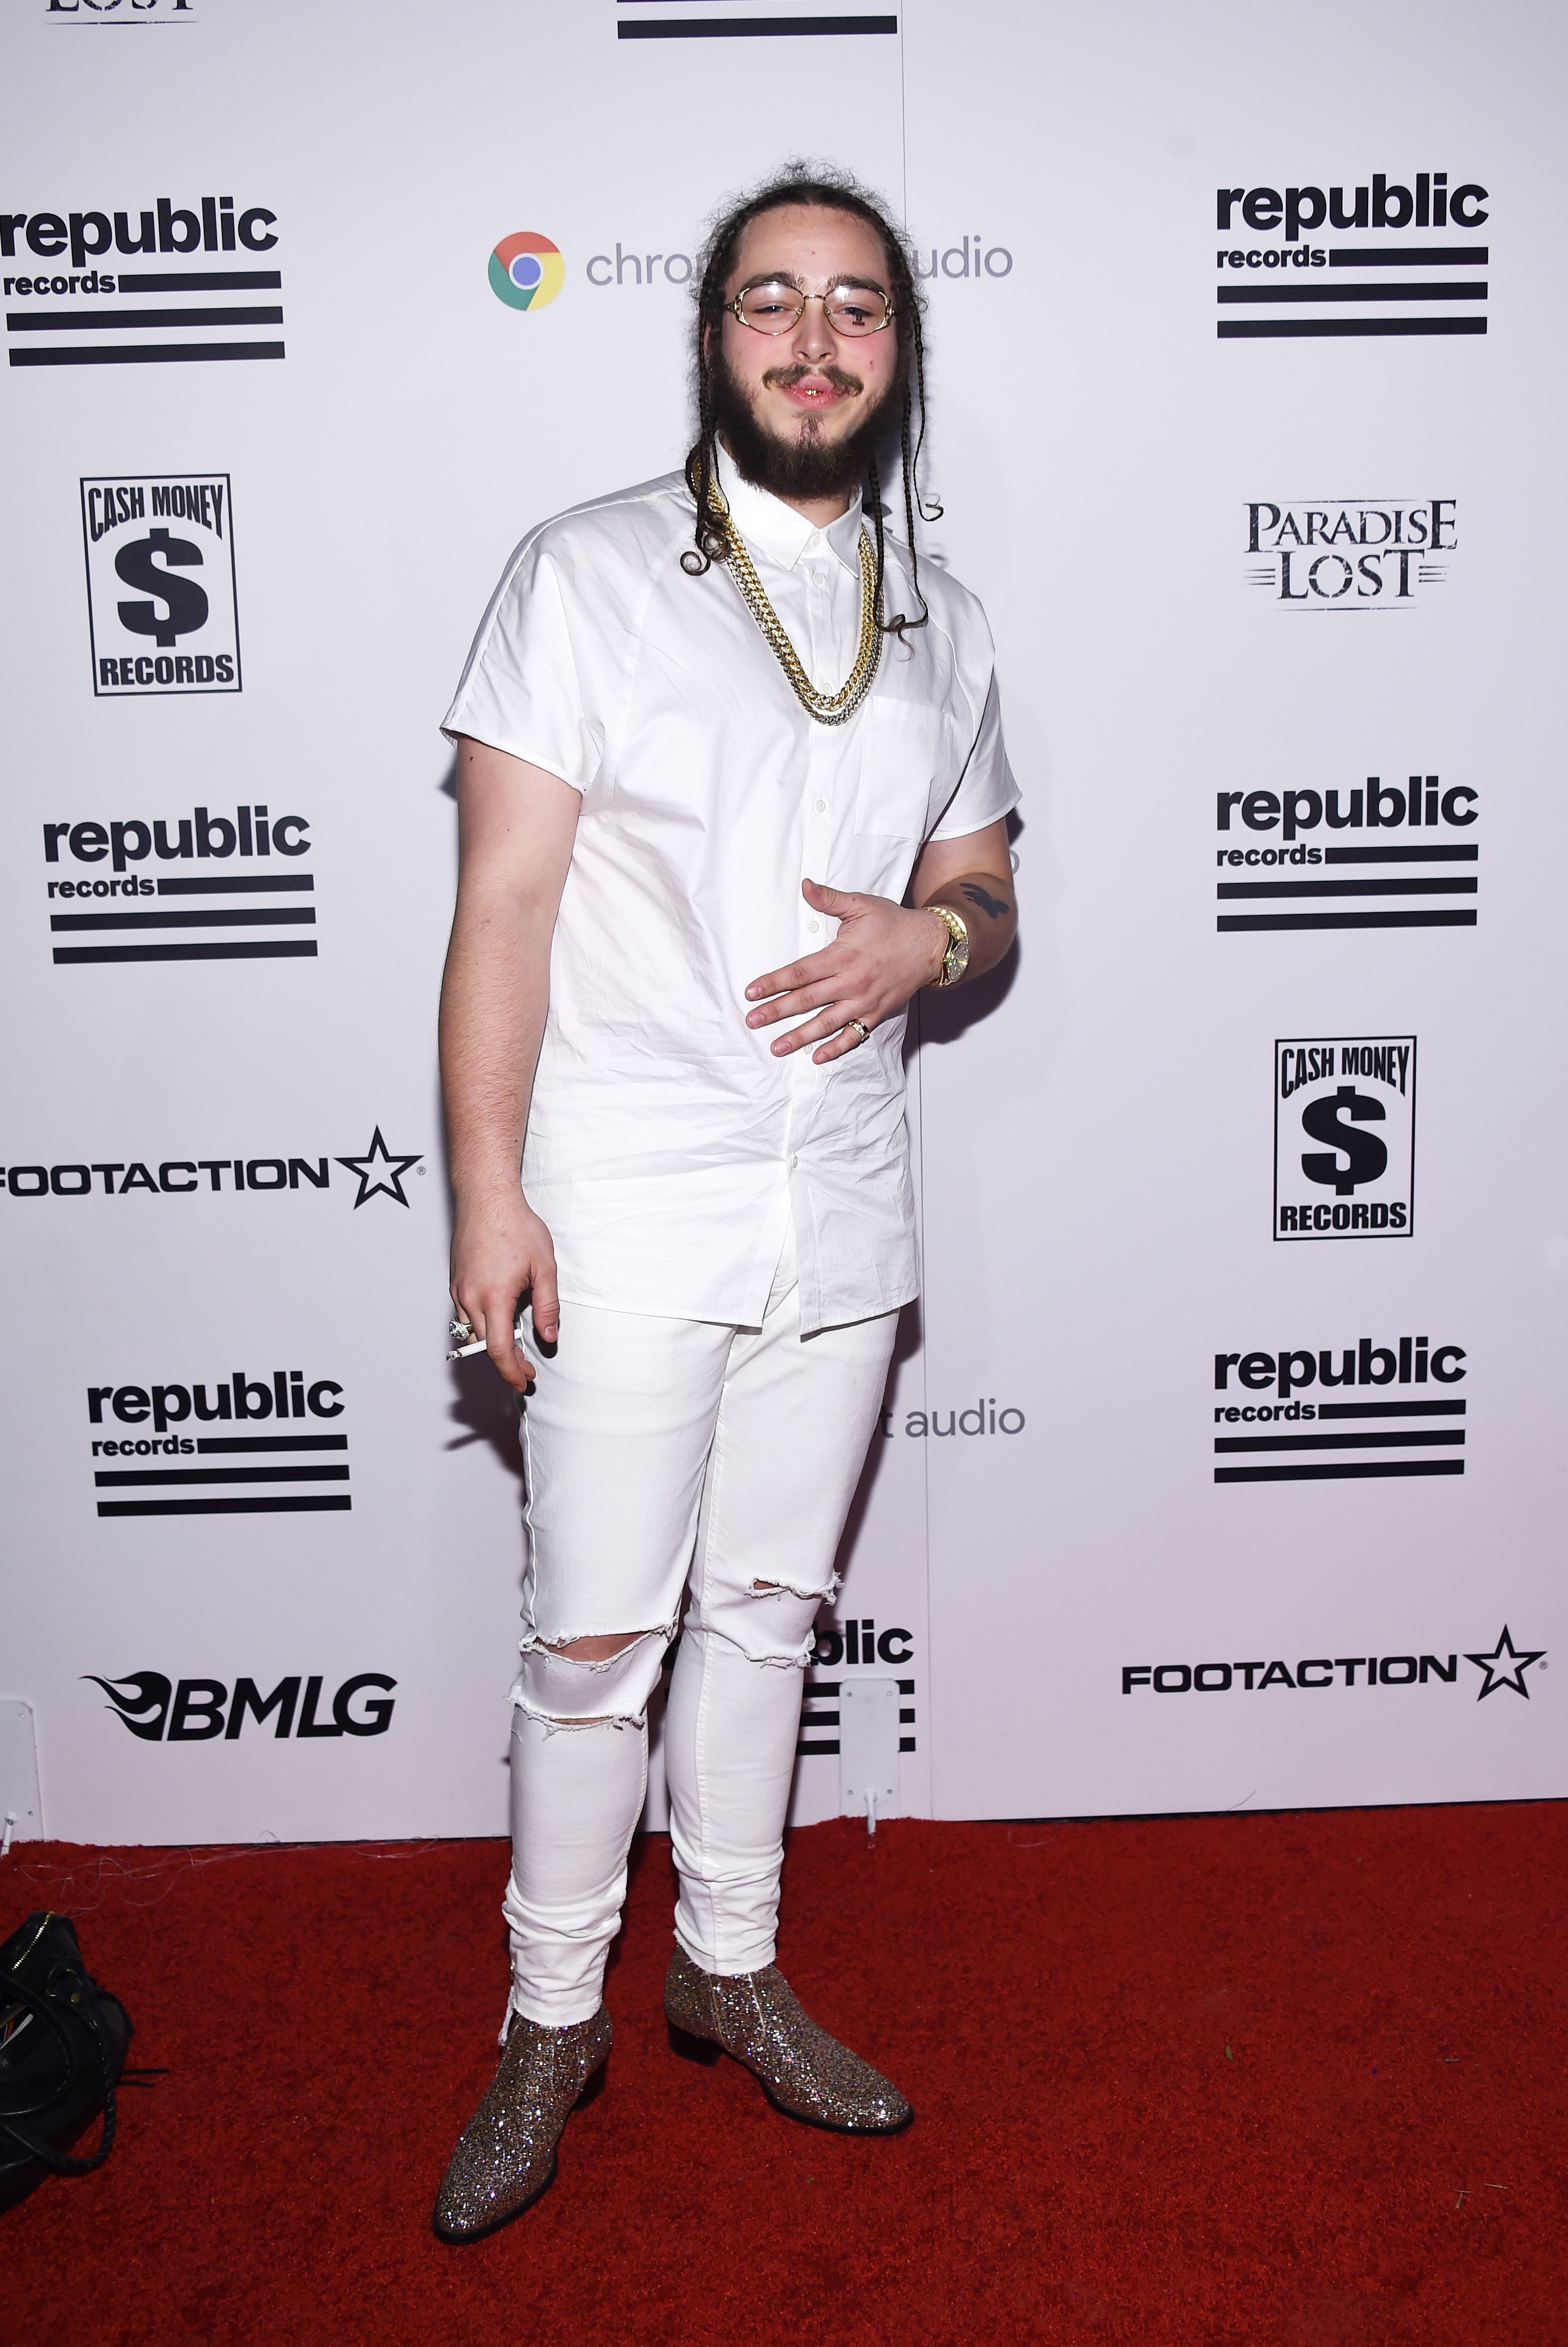 Post Malone debuted on the music scene in 2016 with a stocky build